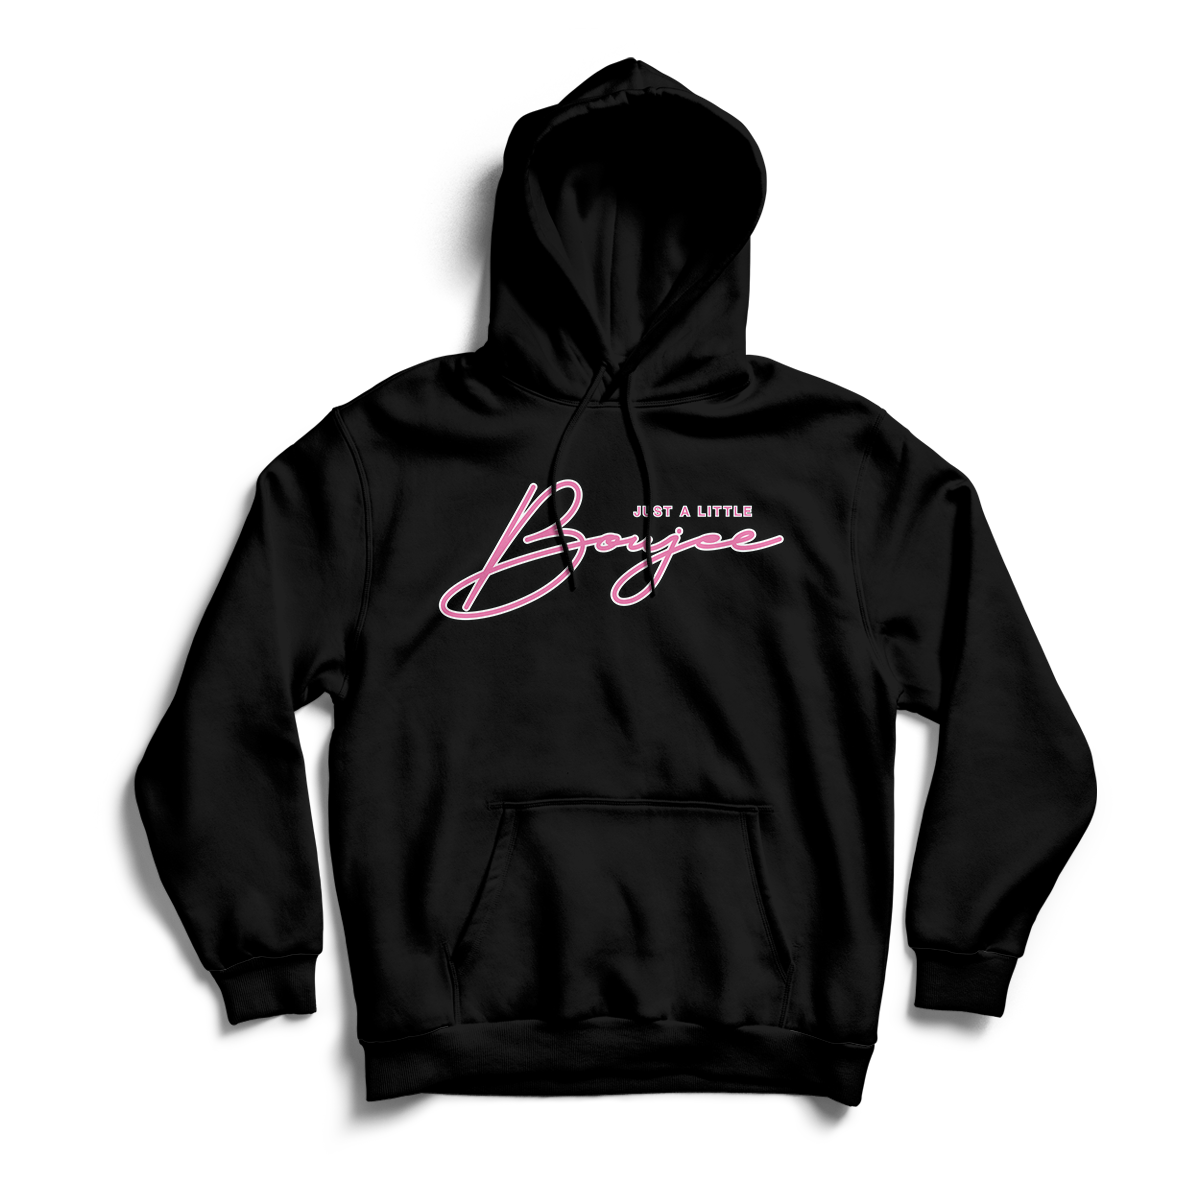 'Just A Lil' Boujee' in Pink Snakeskin CW Unisex Pullover Hoodie